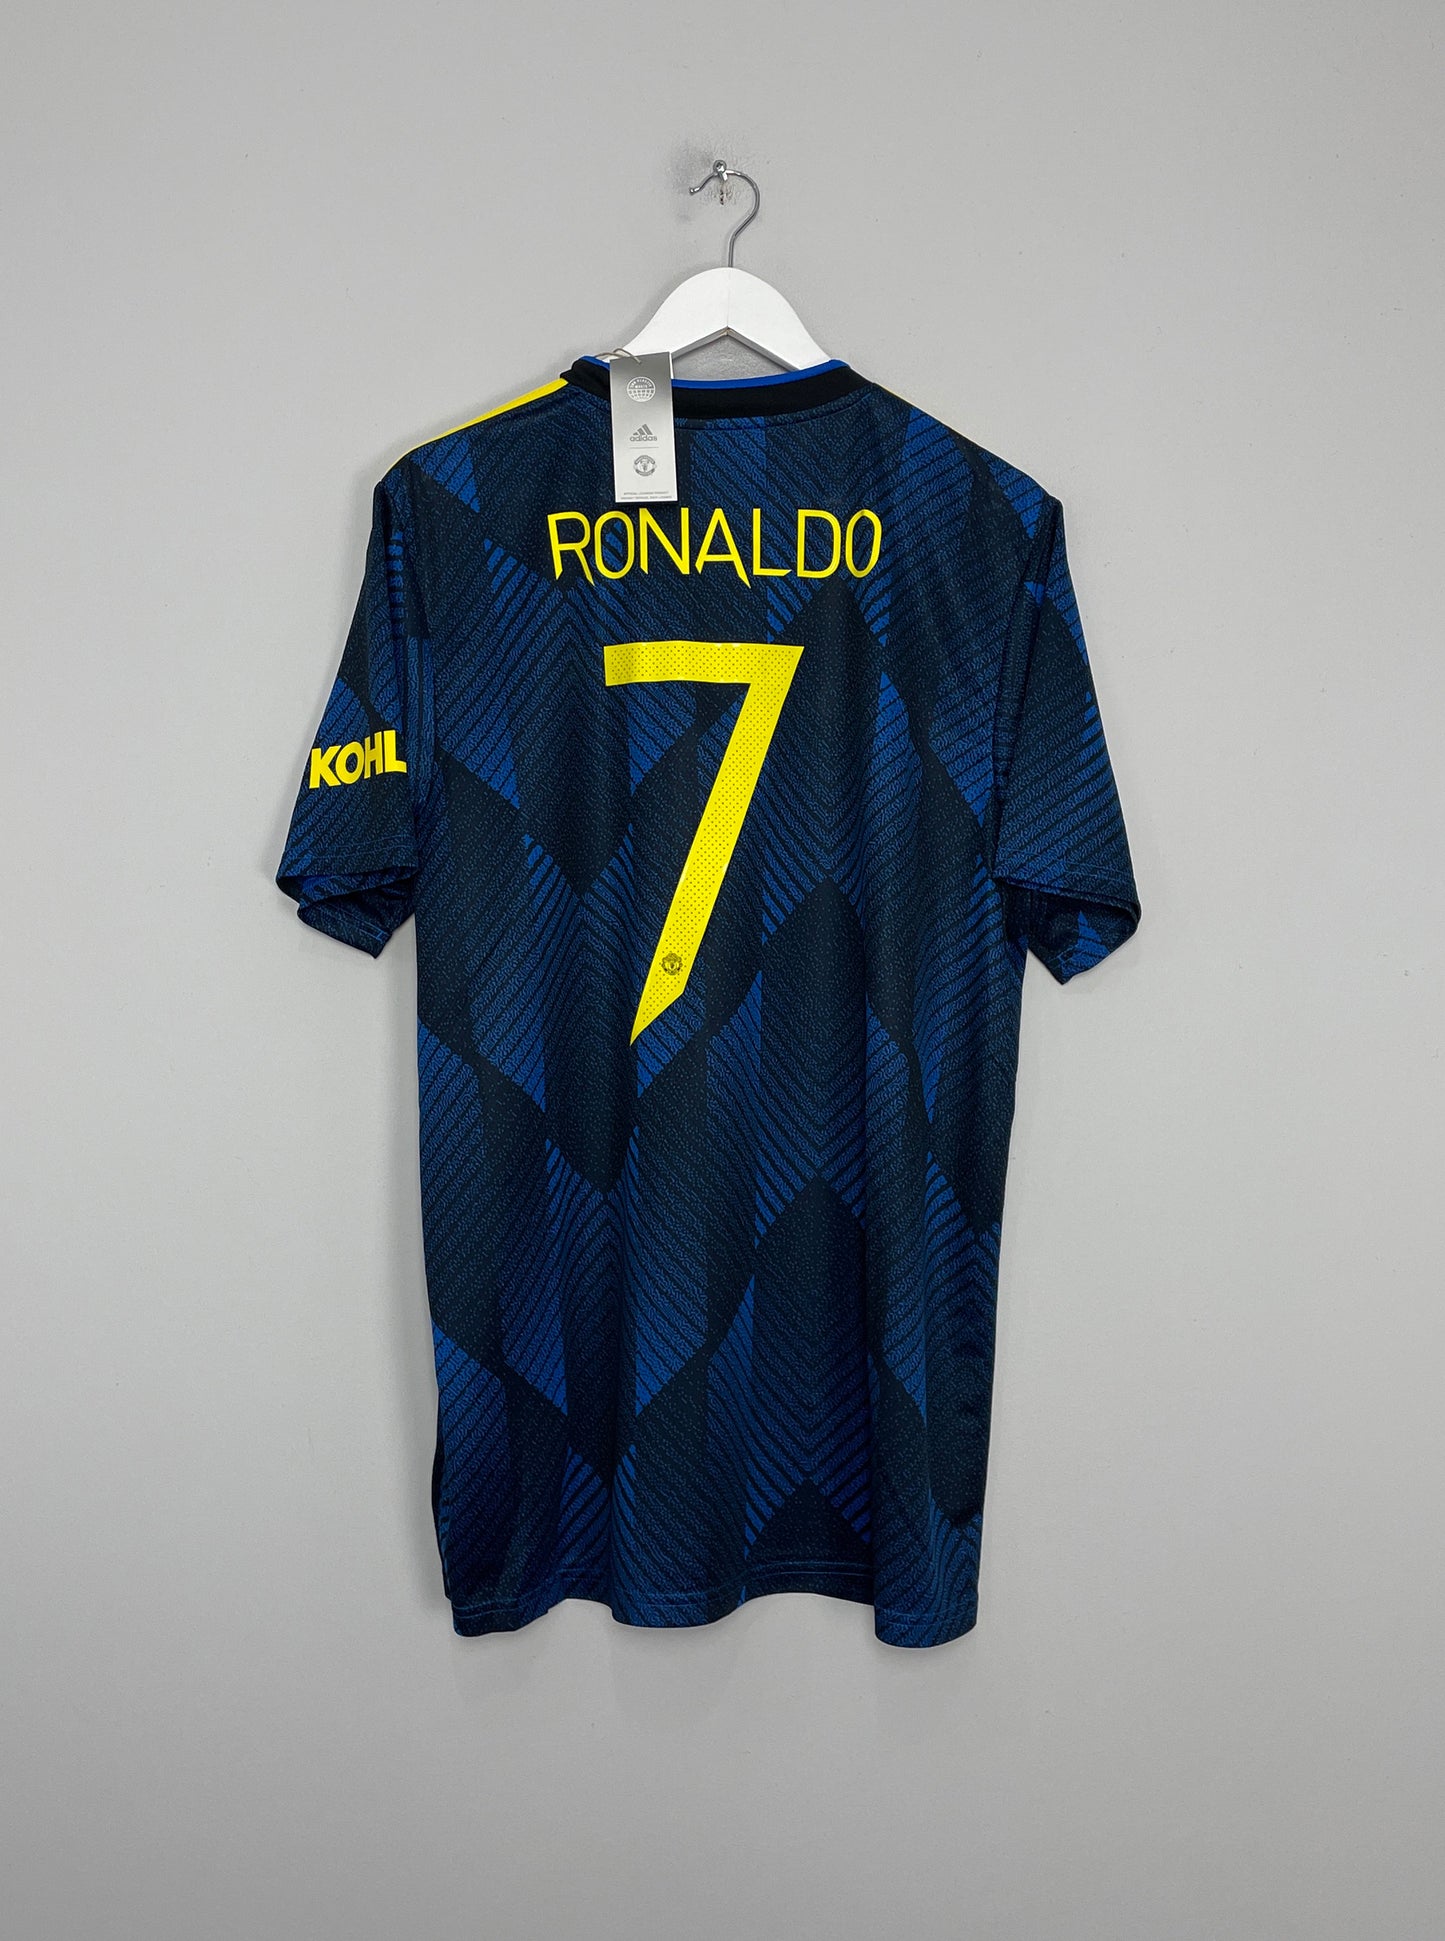 Image of the Manchester United Ronaldo shirt from the 2021/22 season